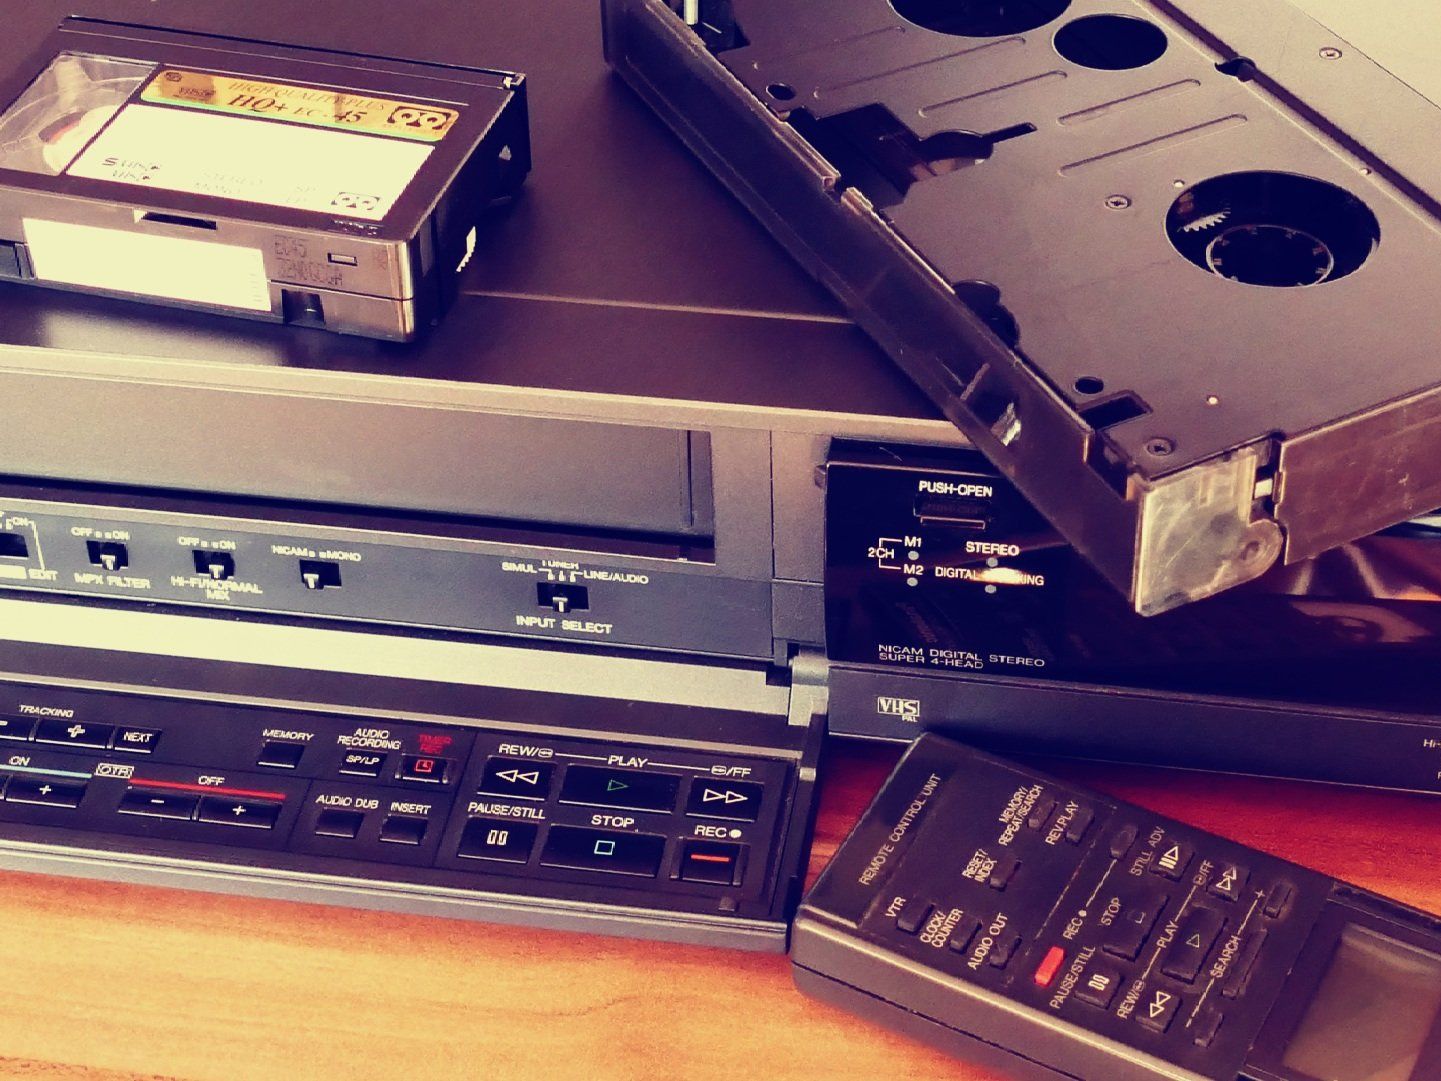 a vhs tape recorder and remote control on a table